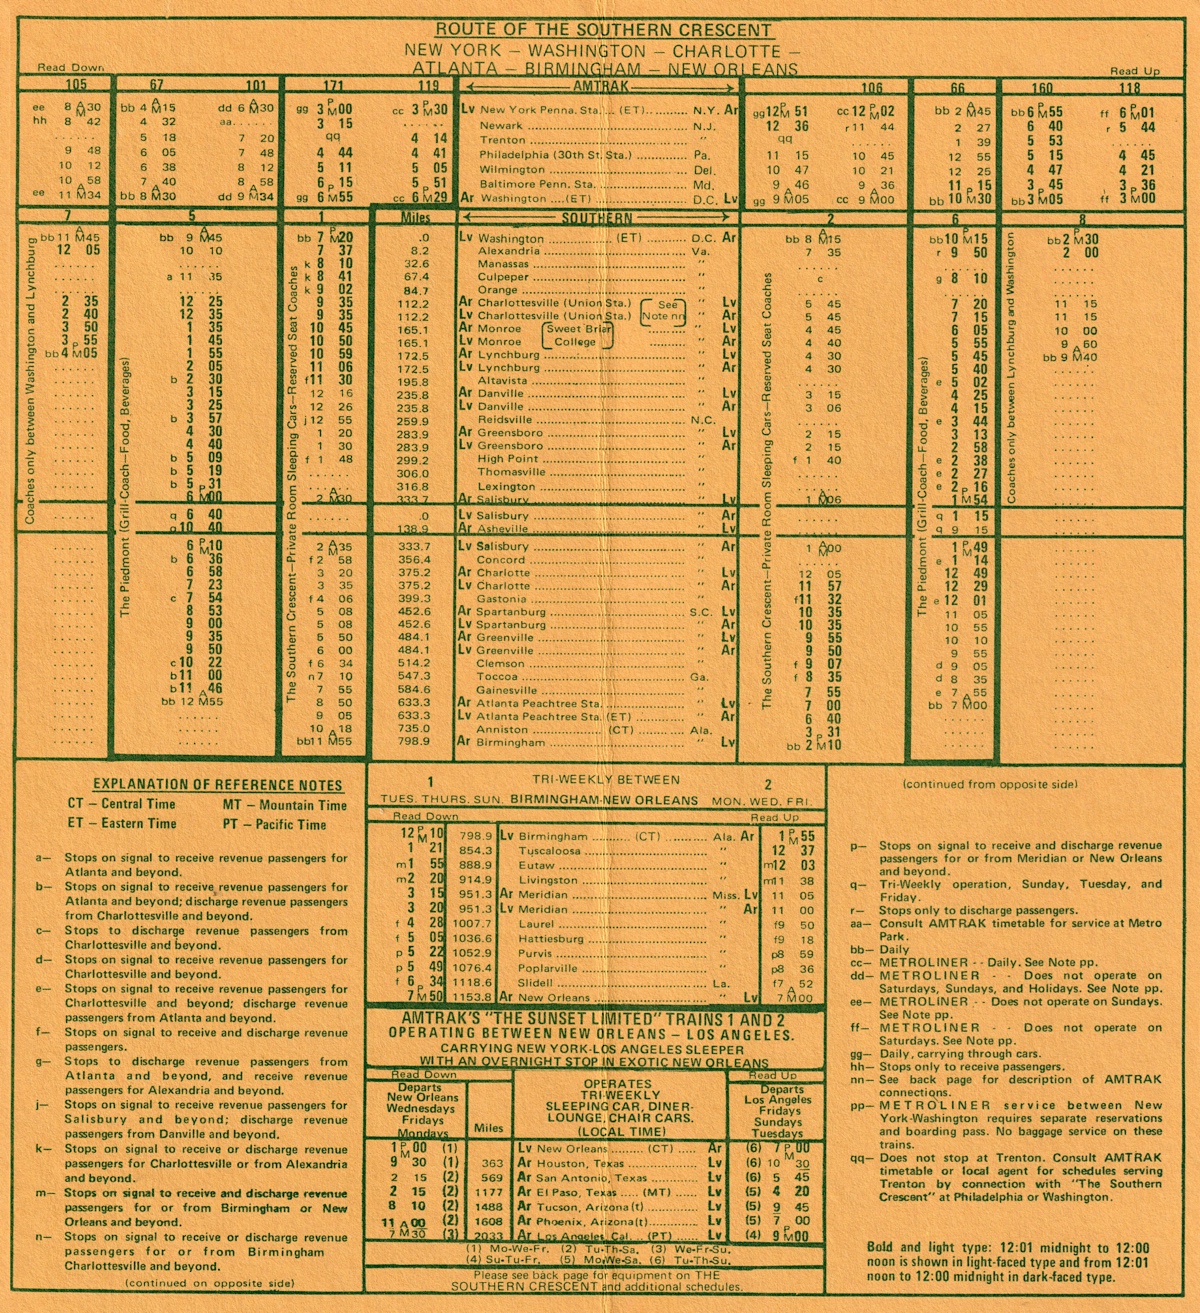 crescent_timetable1974a